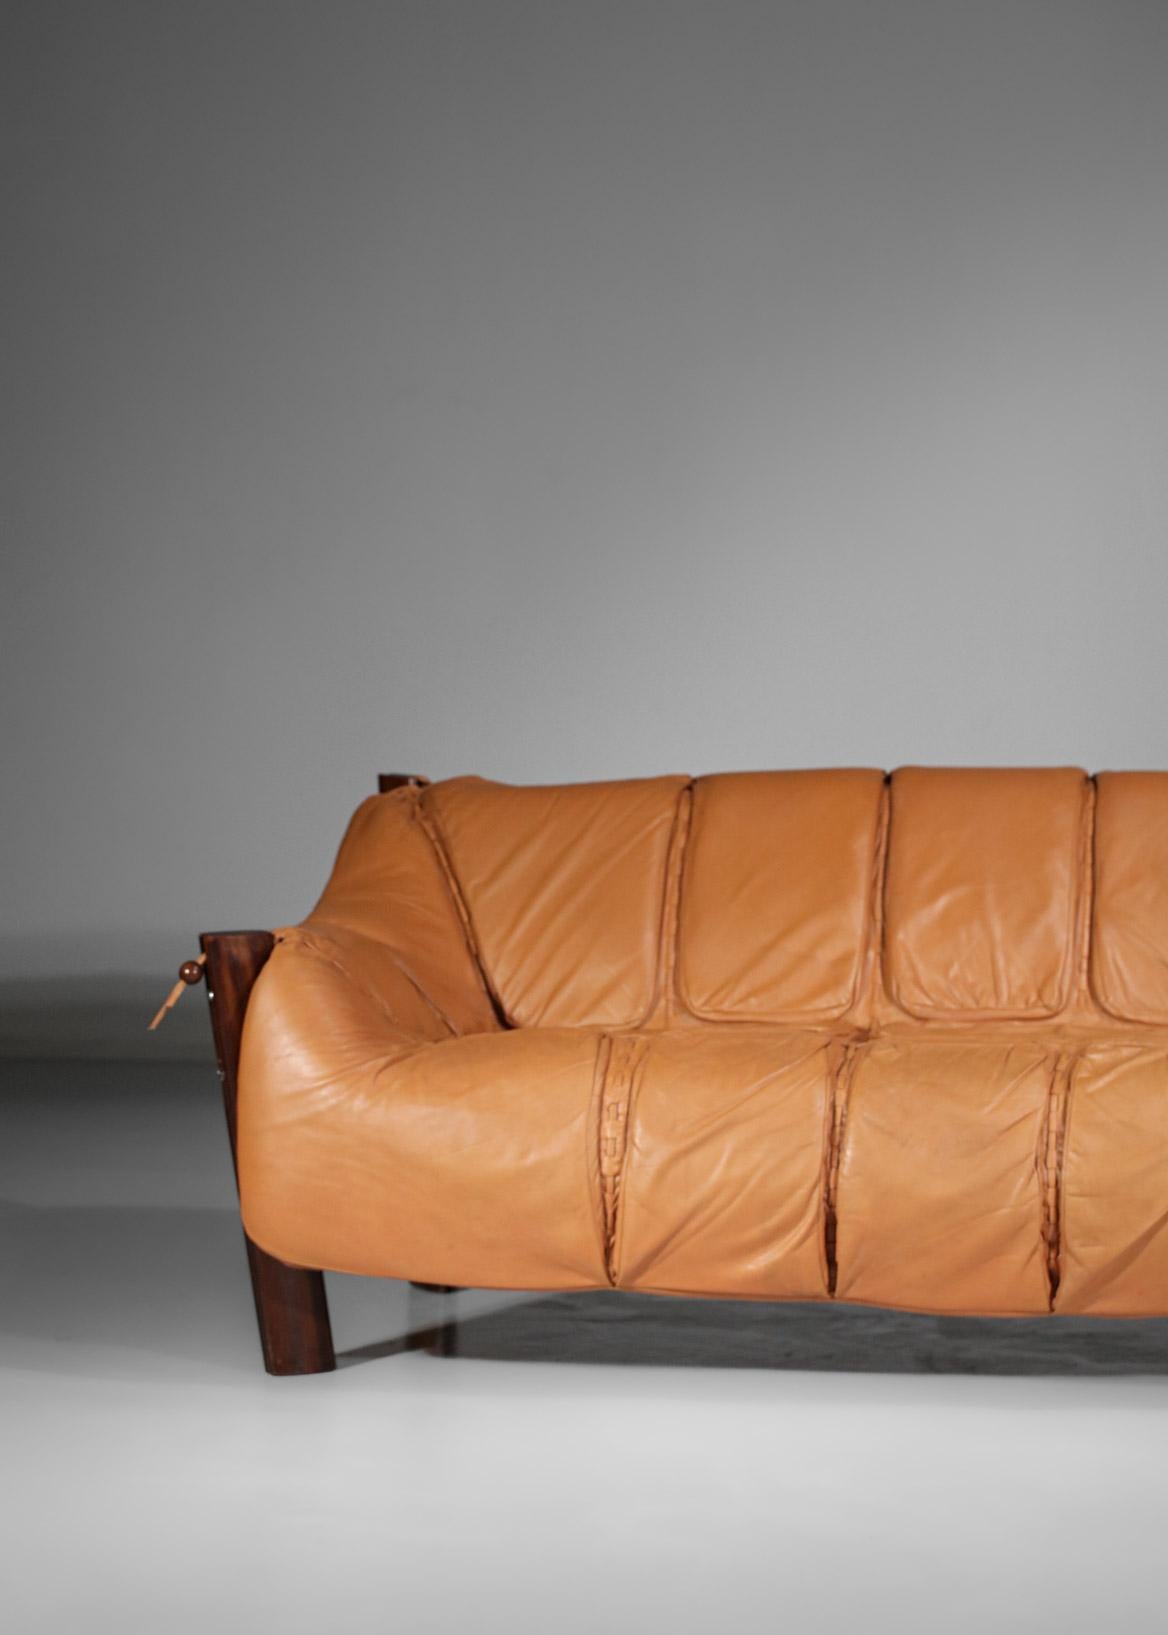 3 seater sofa from the 60's by the famous Brazilian designer Percival Lafer, model MP211. Structure in solid Jacaranda wood, seat in original camel leather. Beautiful model of this sofa in excellent vintage condition with a nice patina of the